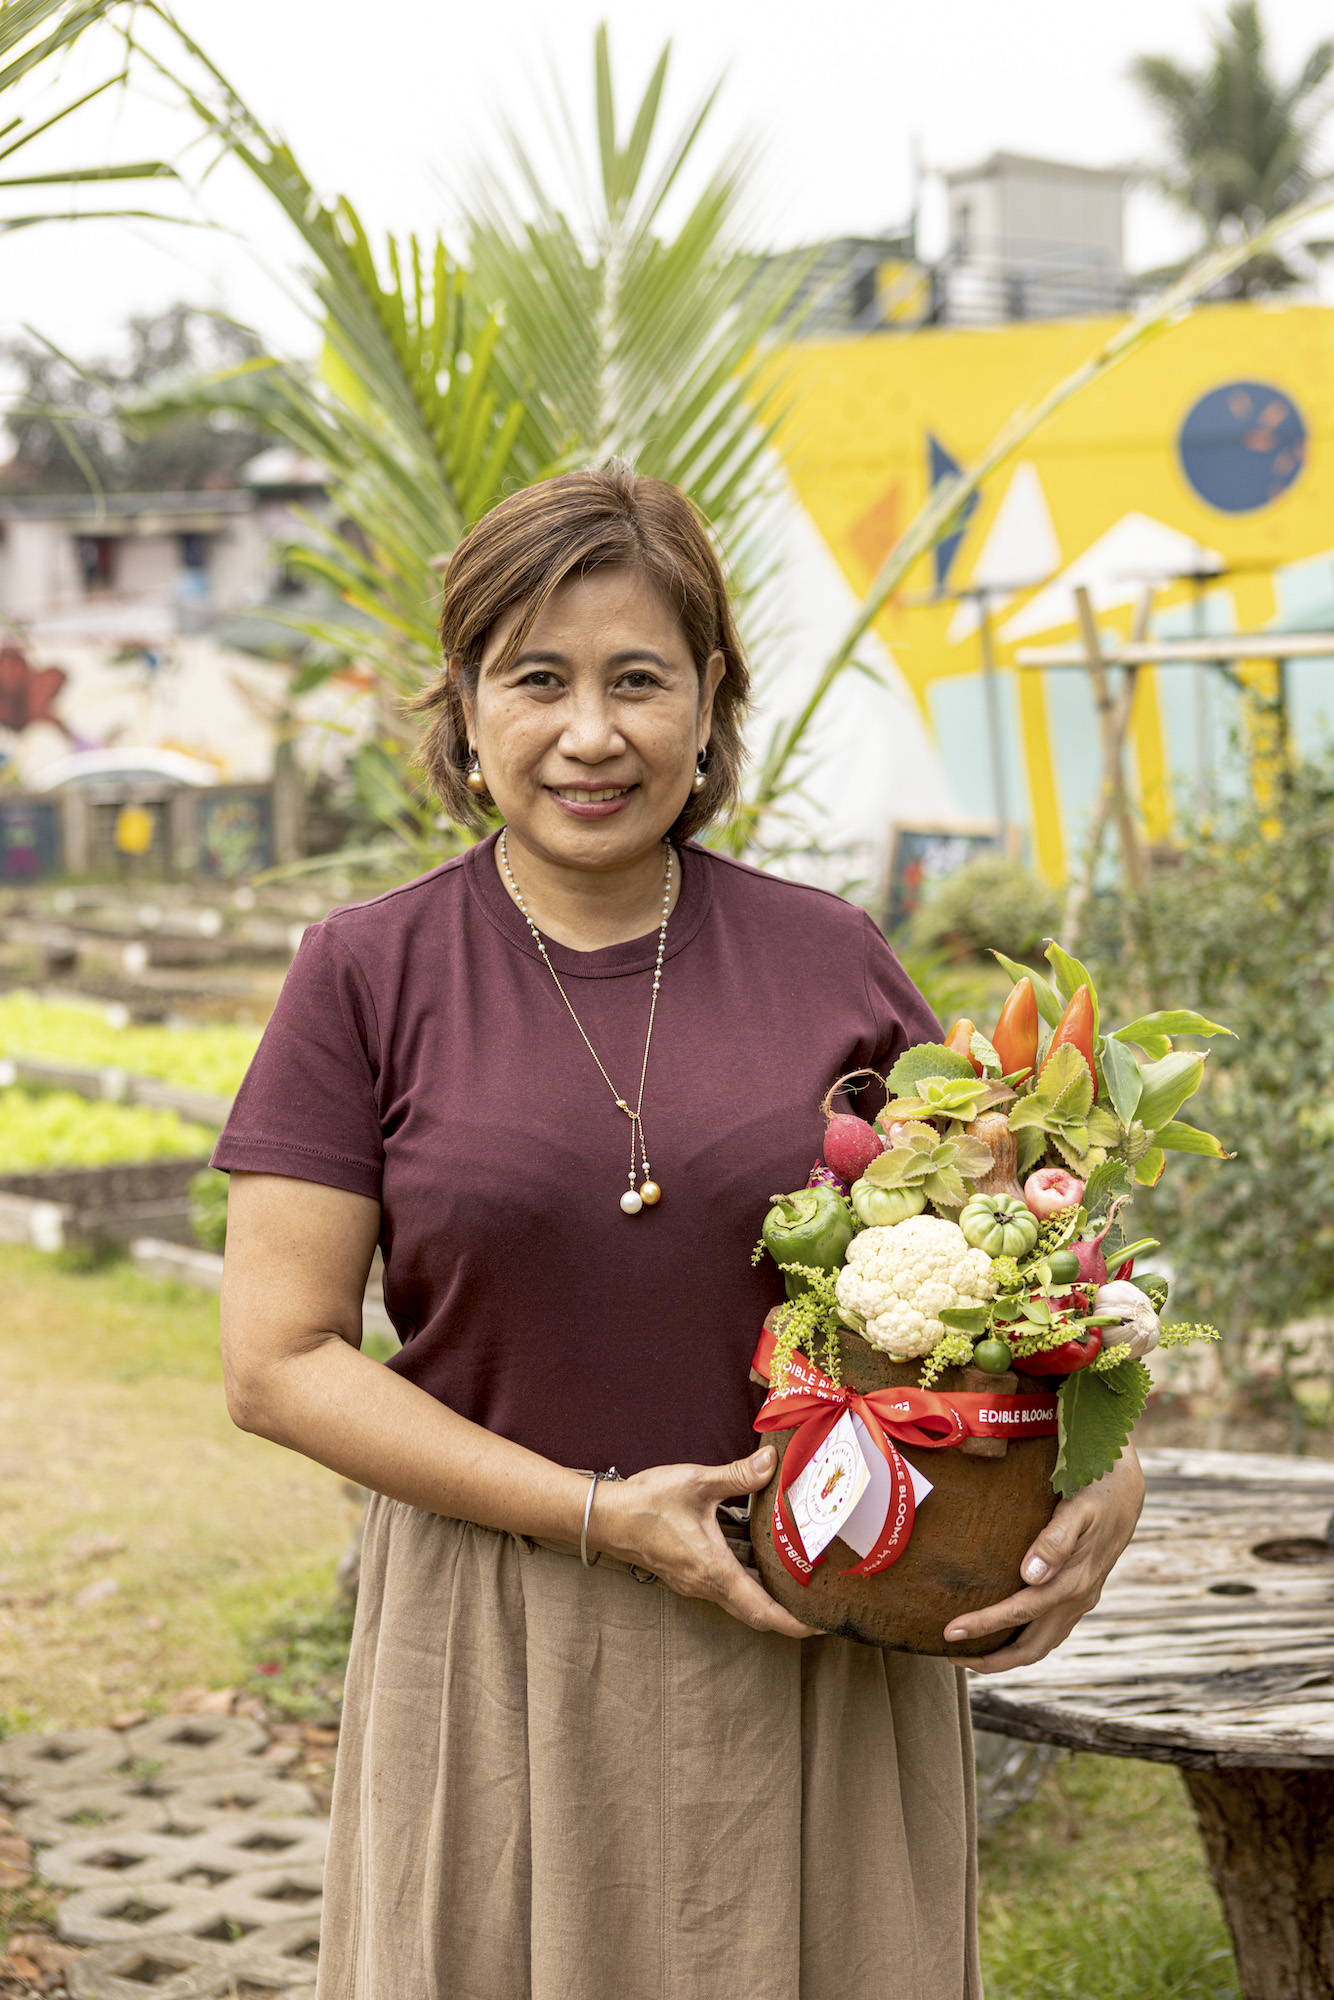 Louie's wife Maye Araneta-Gutierrez with a vegetable bouquet she makes and arranges herself. Her "edible blooms" are also available for sale at the farm